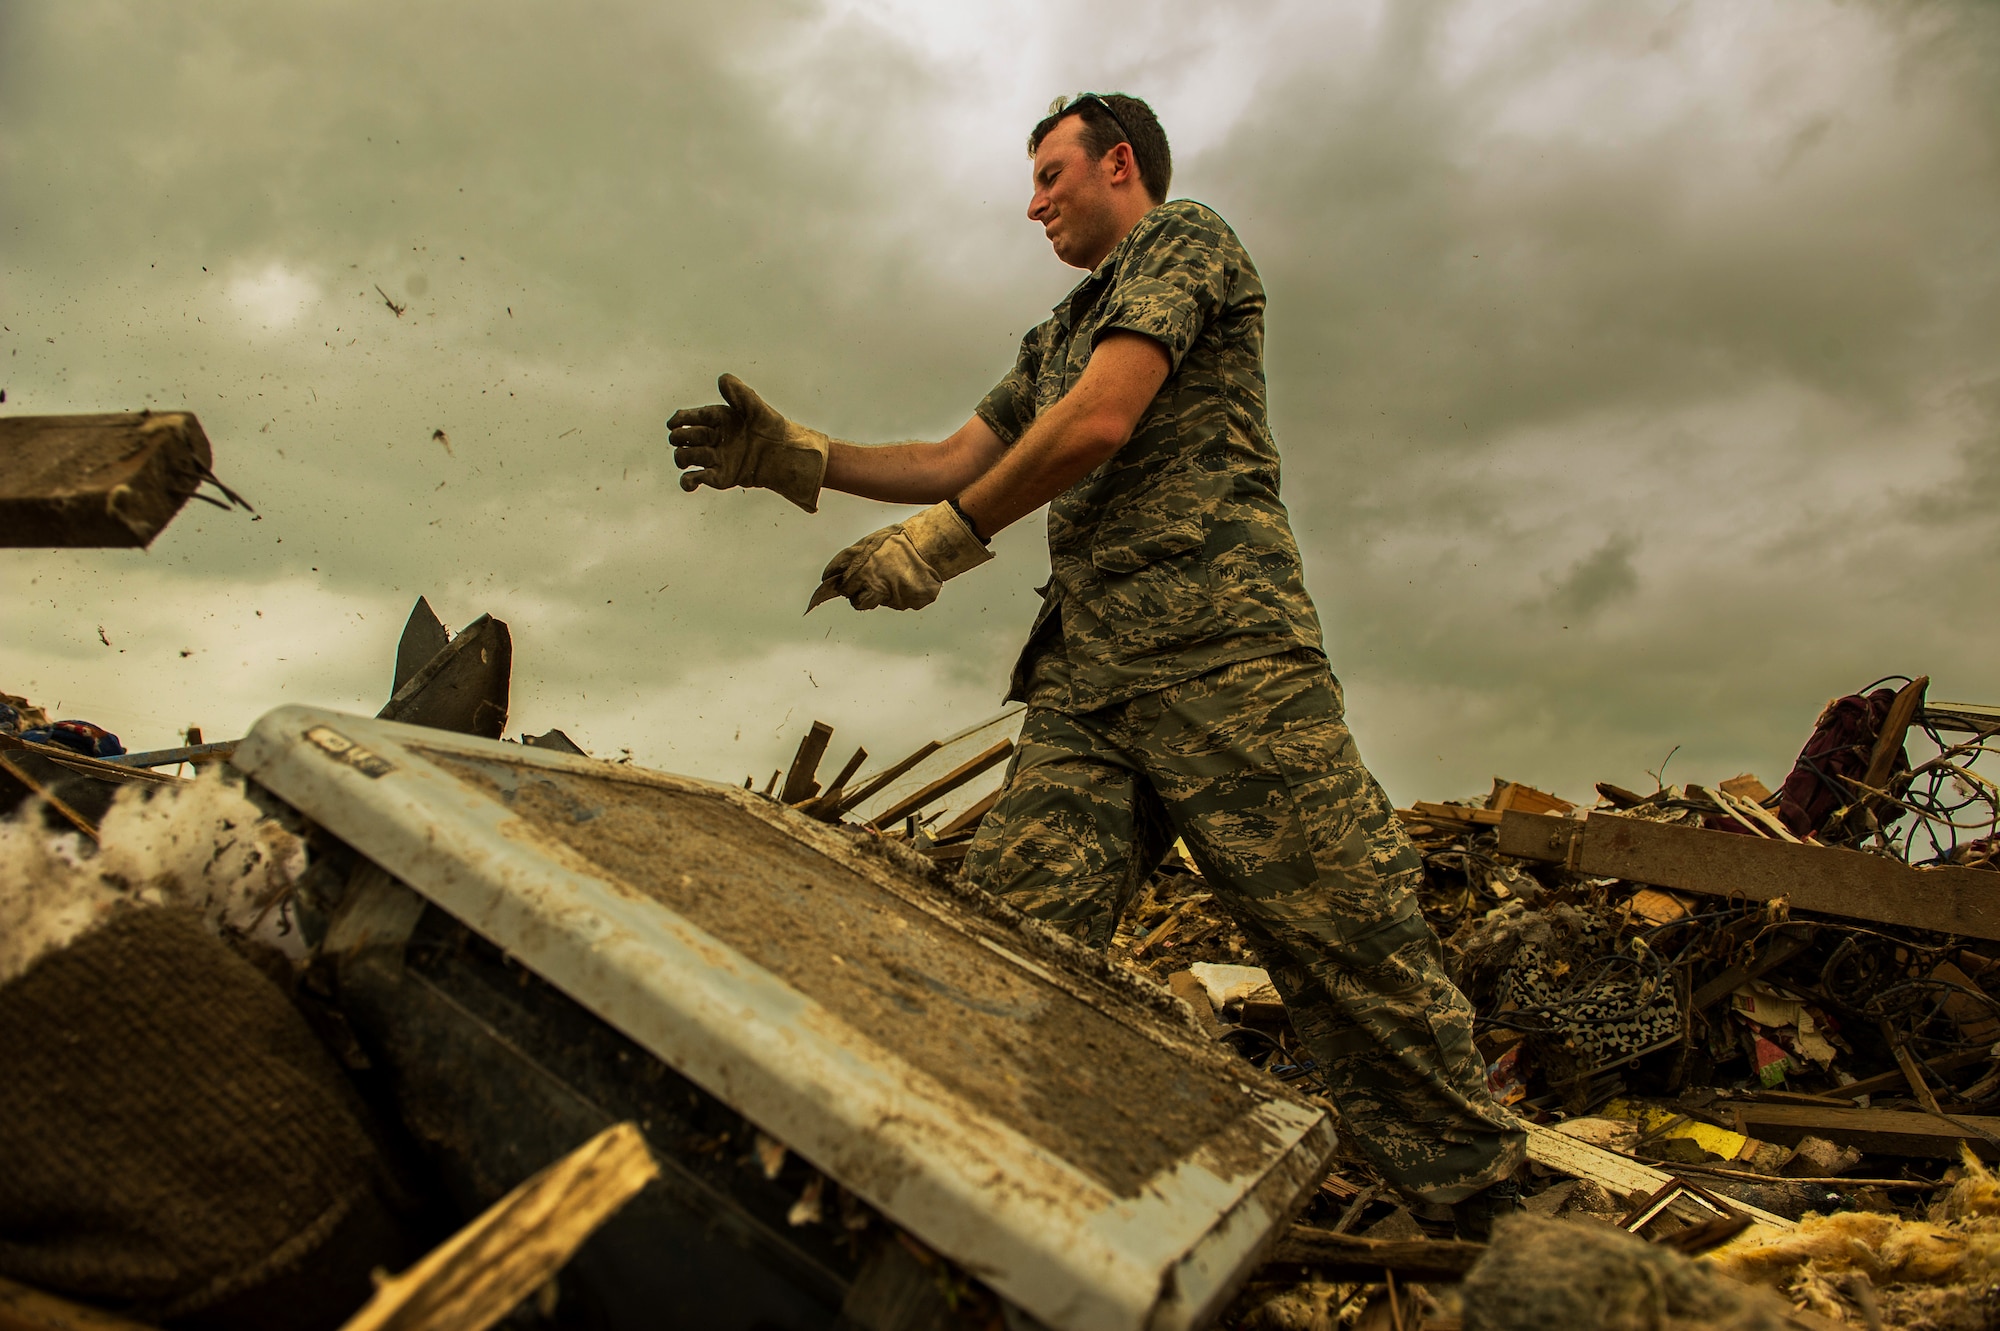 U.S. Air Force Capt. Ryan Gers, searches through the rubble of a leveled home, May 23, 2013, looking for anything salvageable after a tornado ripped through parts of Moore, Okla., May 20, which damaged more than 13,000 homes. More than 600 Airmen from the greater Oklahoma area volunteered to assist in the relief efforts. Gers is assigned to the 965th Airborne Air Control Squadron, Tinker Air Force Base, Okla., and hails from Scottsdale, Ariz. (U.S. Air Force photo by Staff Sgt. Jonathan Snyder)